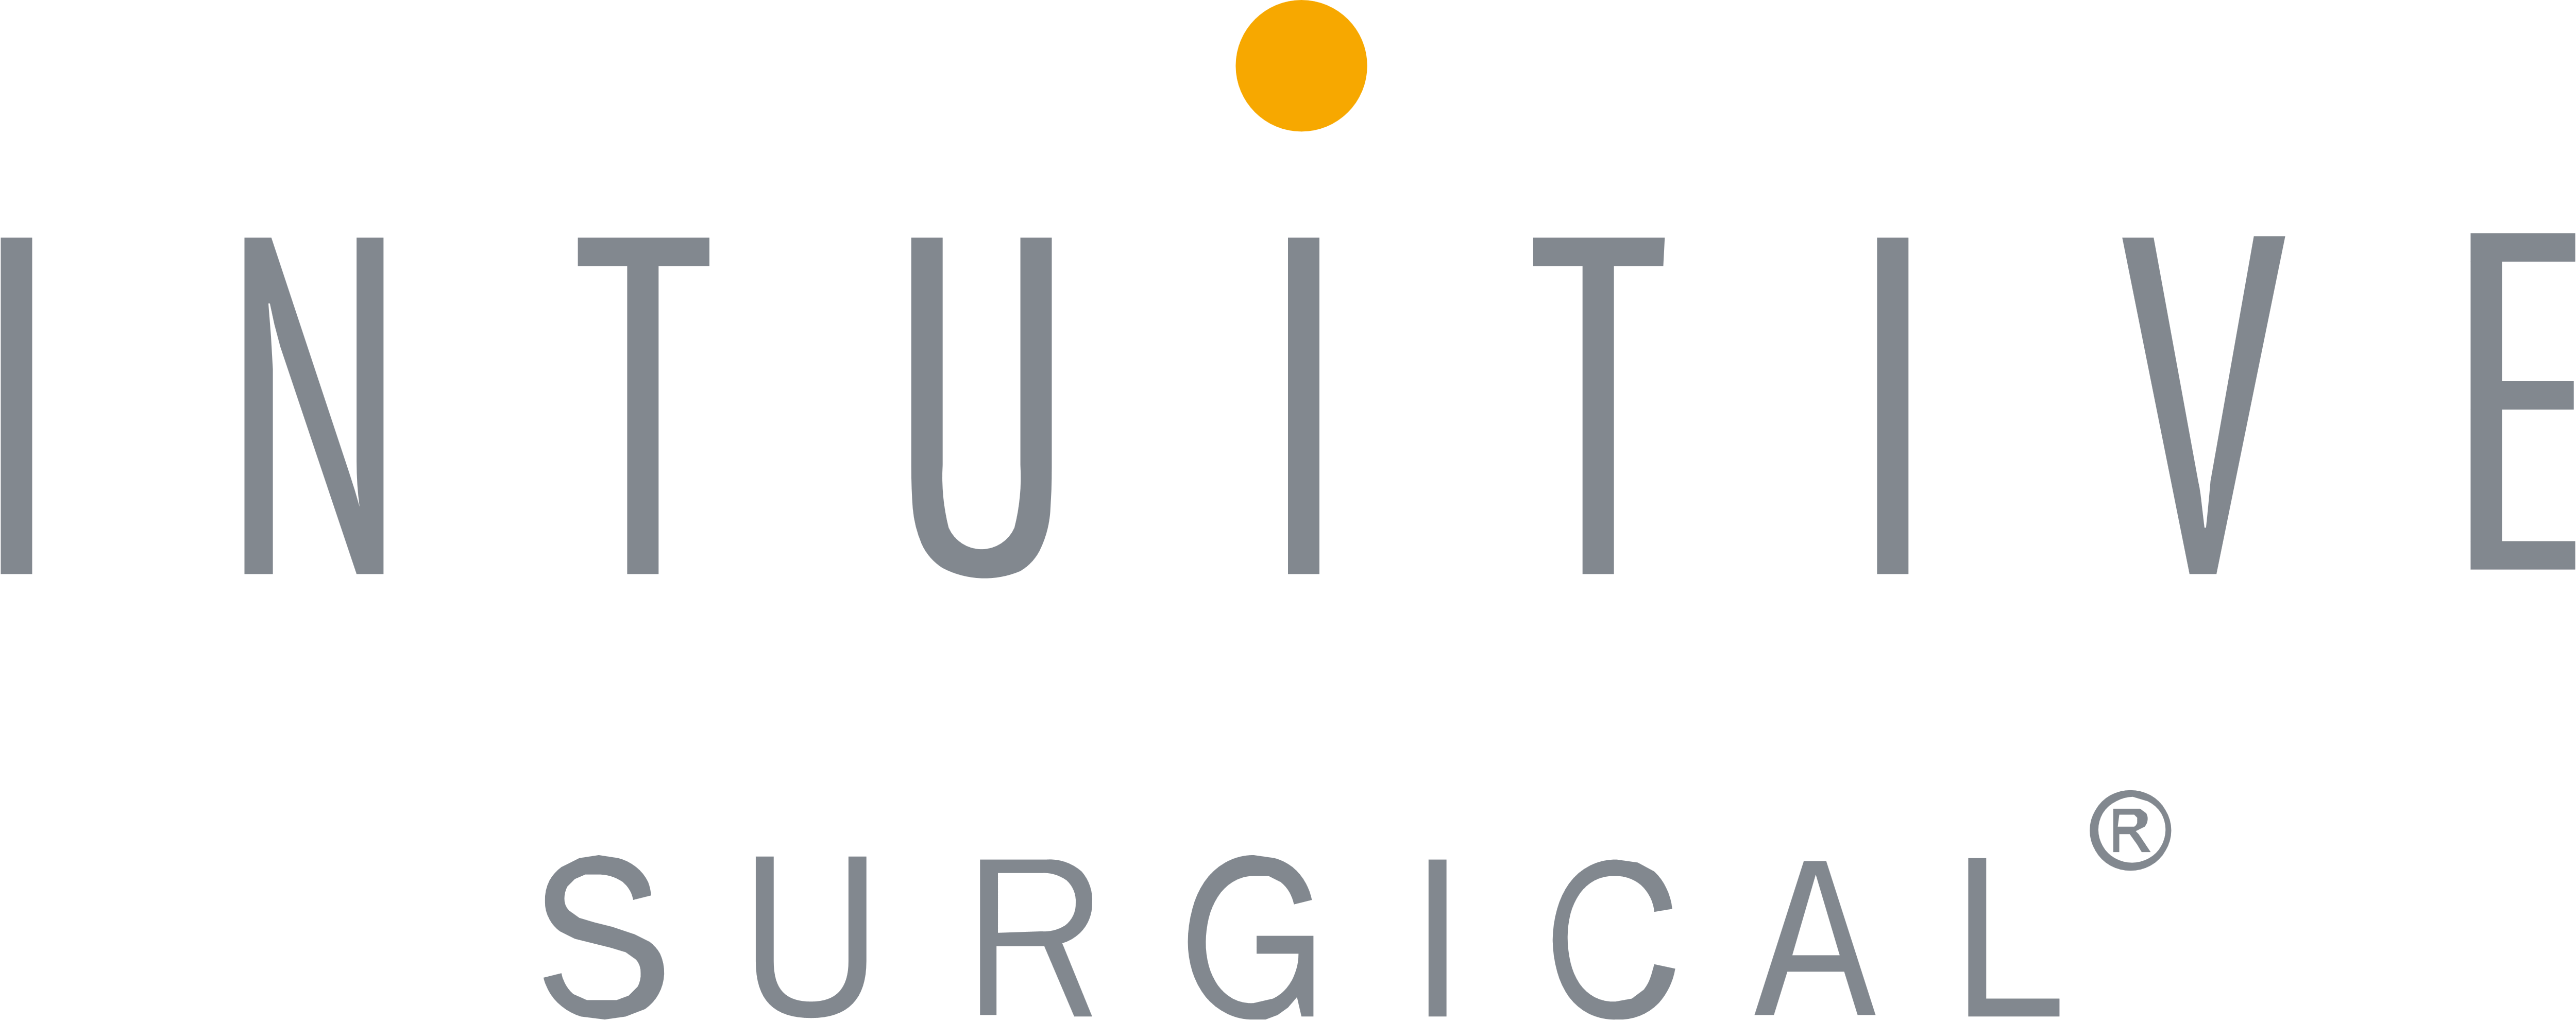 Intuitive Surgical Logo